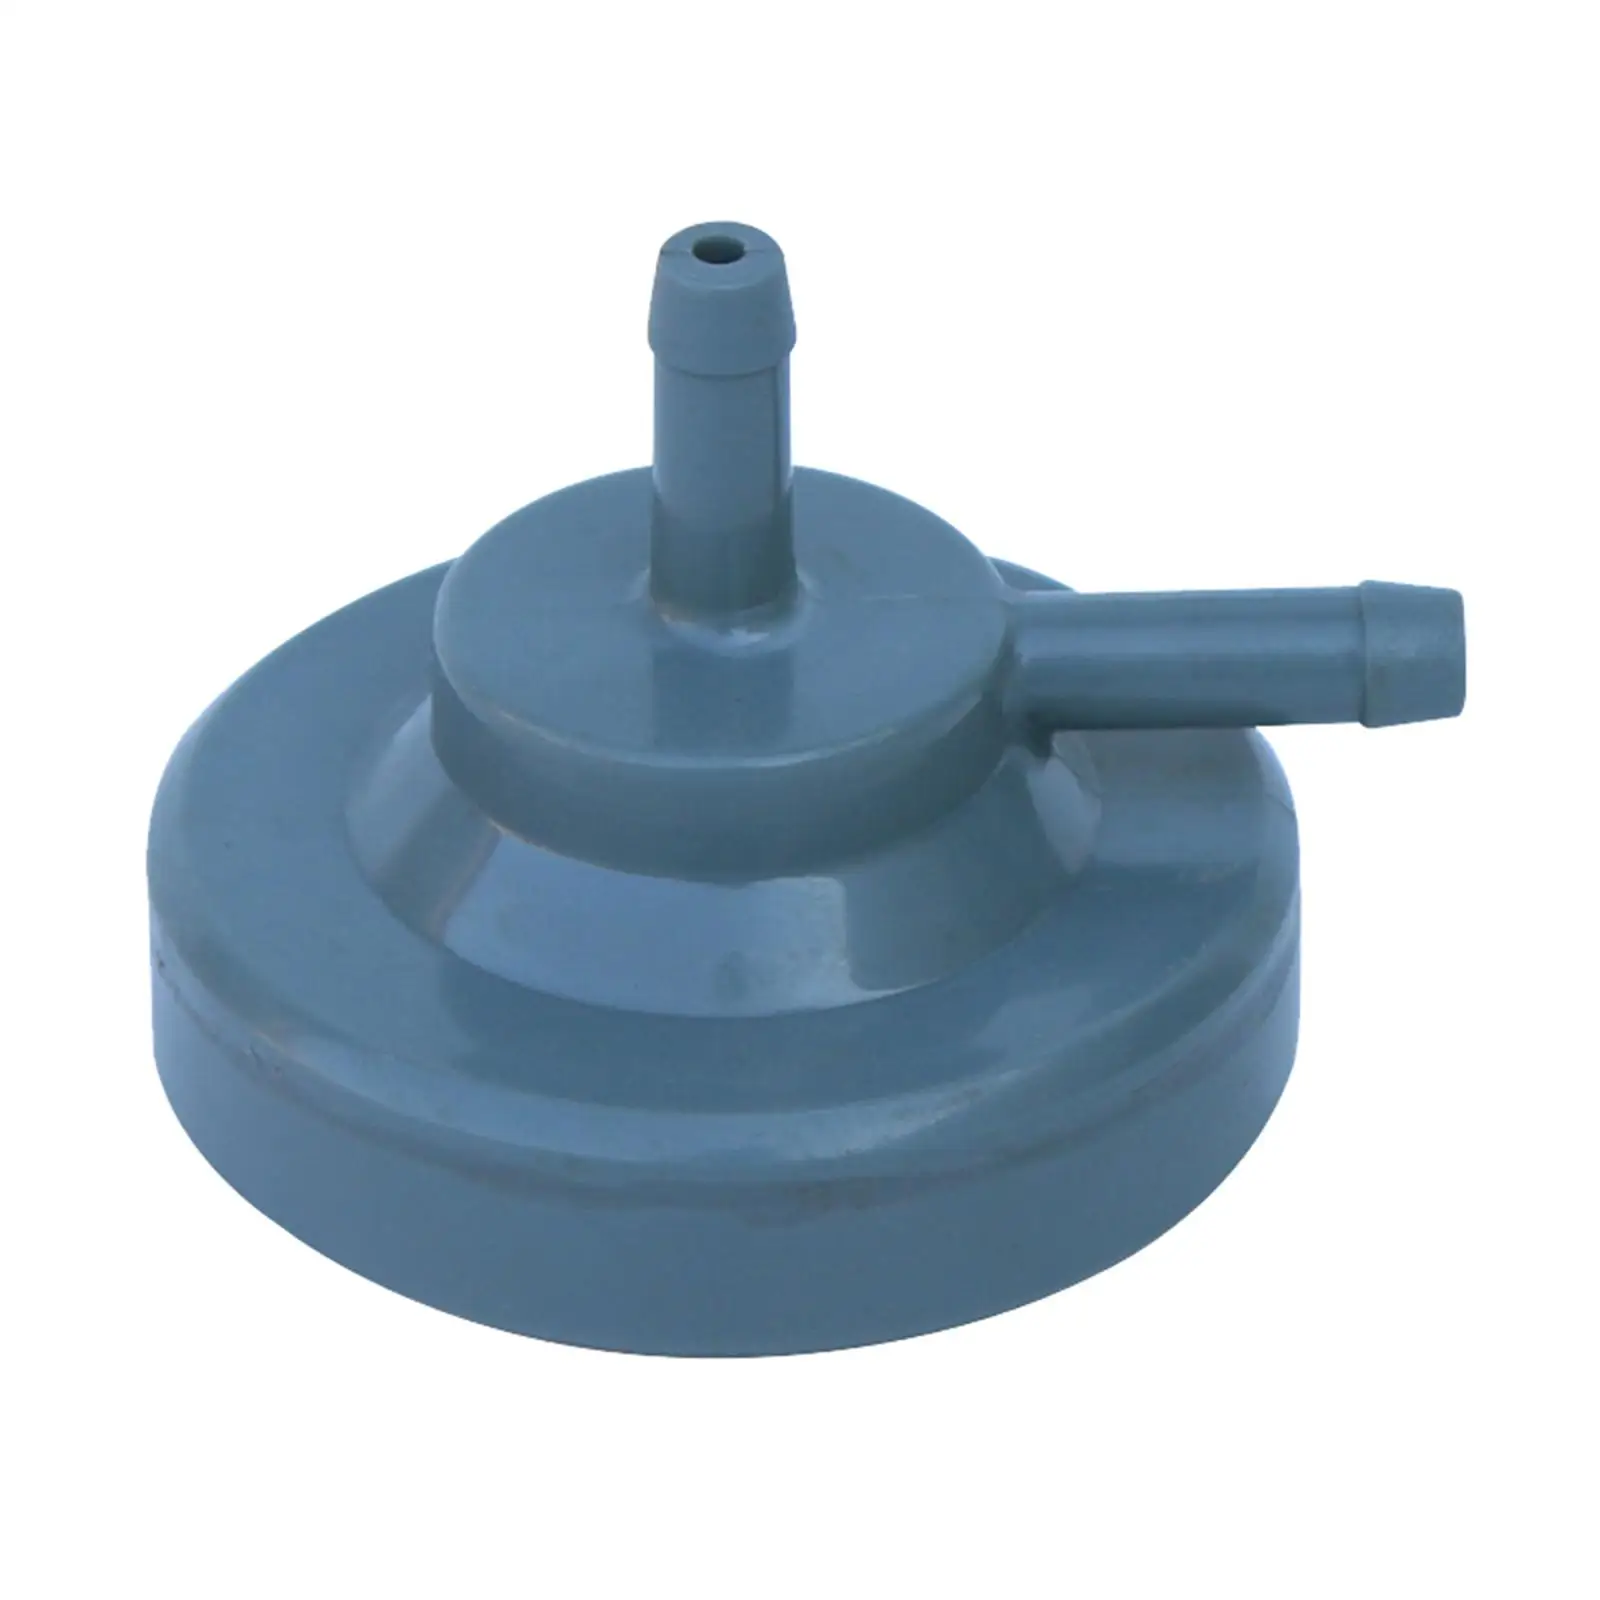 Heater Fuel Pump Damper 478814 Direct Replaces Supplies professional for High Performance Easy to Install